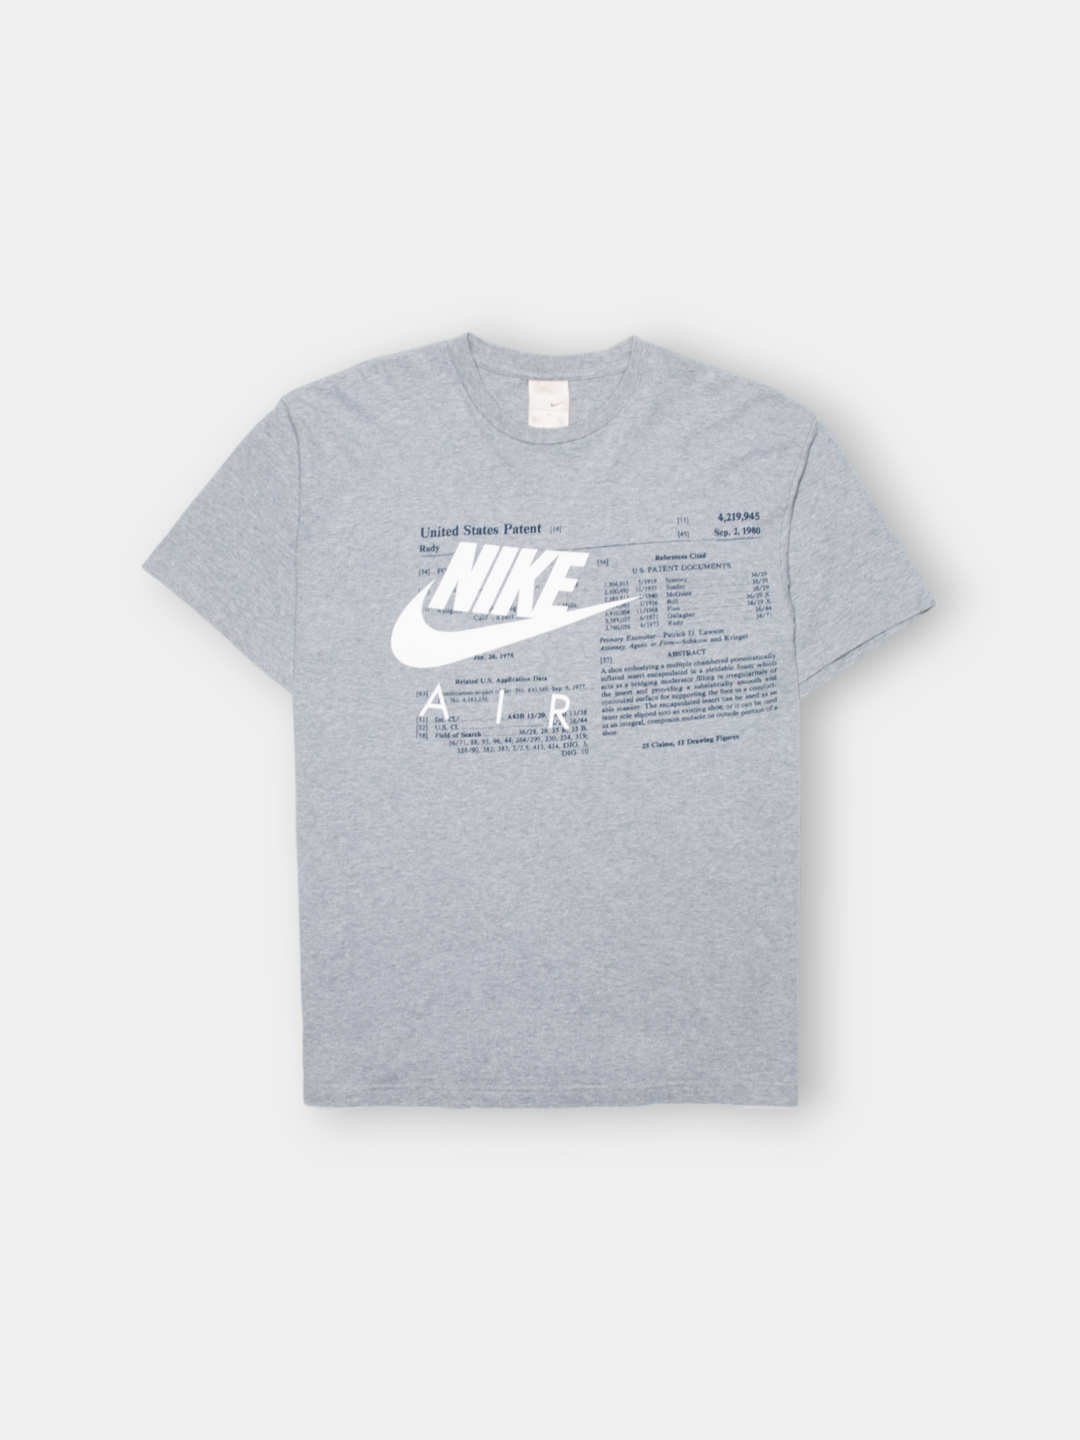 00s Nike Spell Out Tee (XXL)